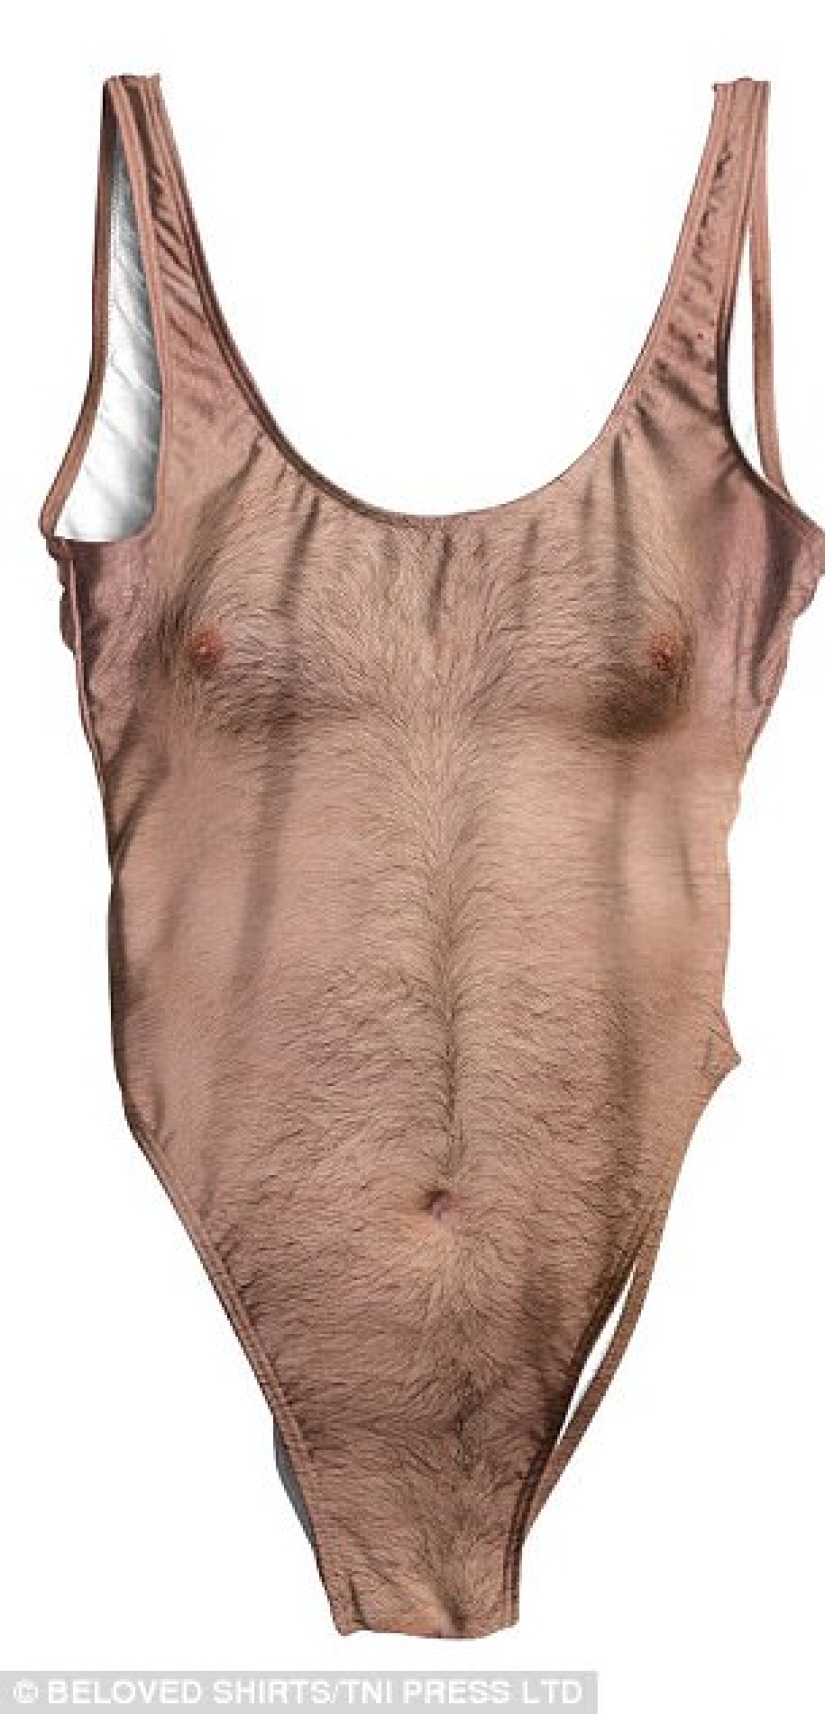 Nothing special, just a women's swimsuit with a print of a man's hairy chest